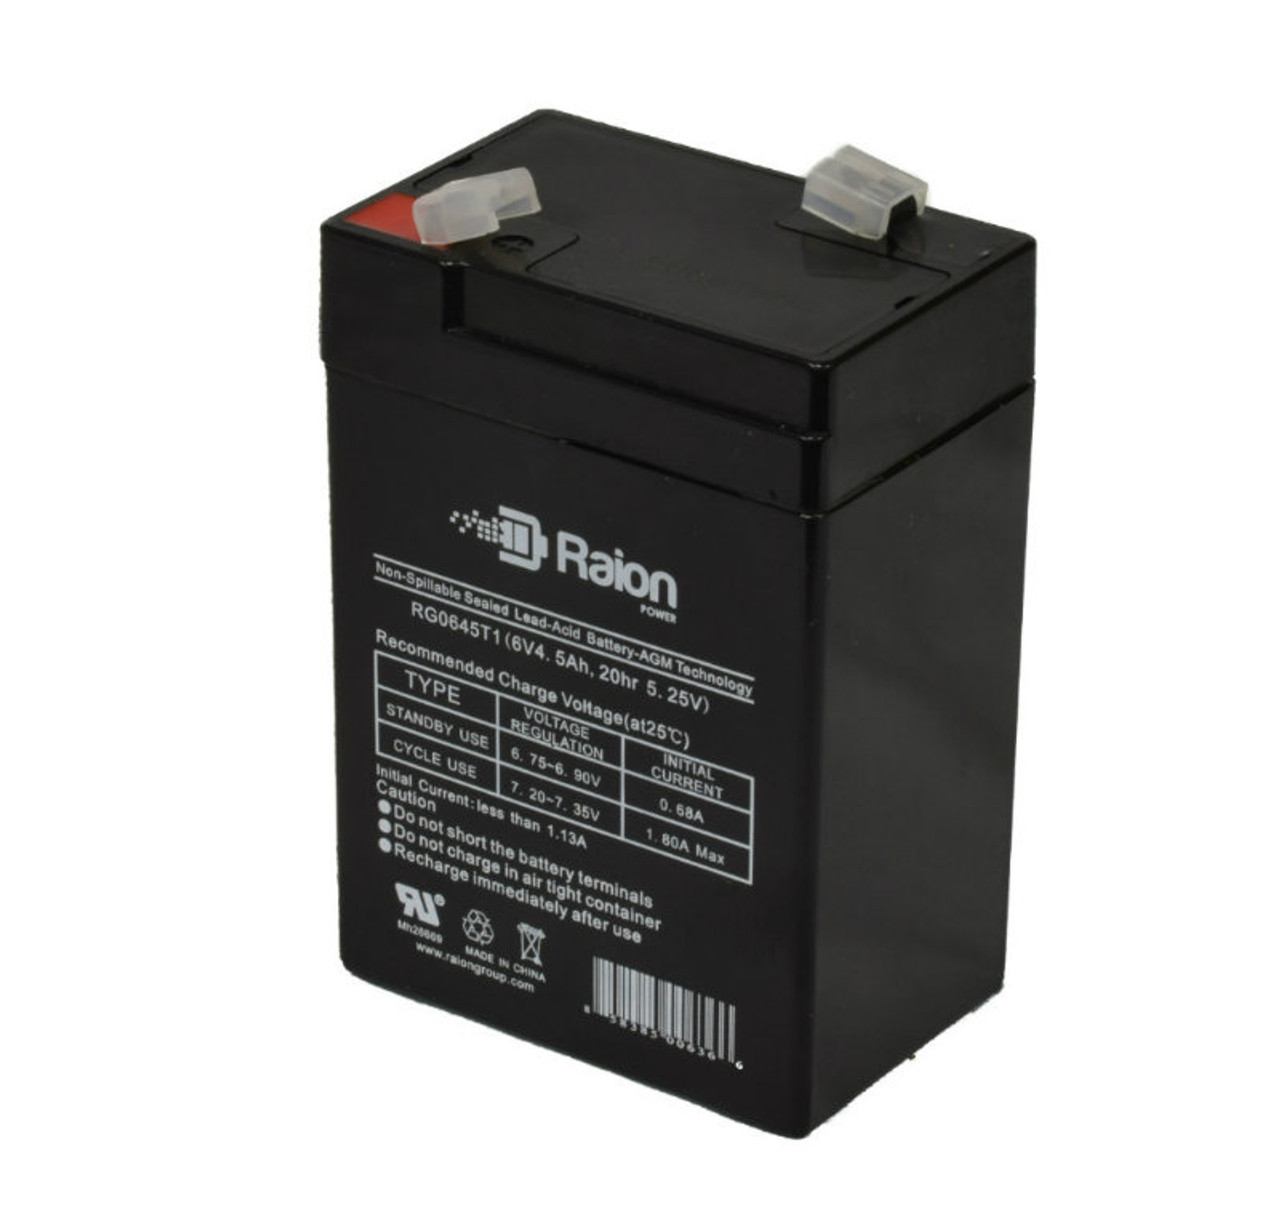 Raion Power RG0645T1 6V 4.5Ah Replacement Battery Cartridge for Nellcor N1000 Pulse Oximeter